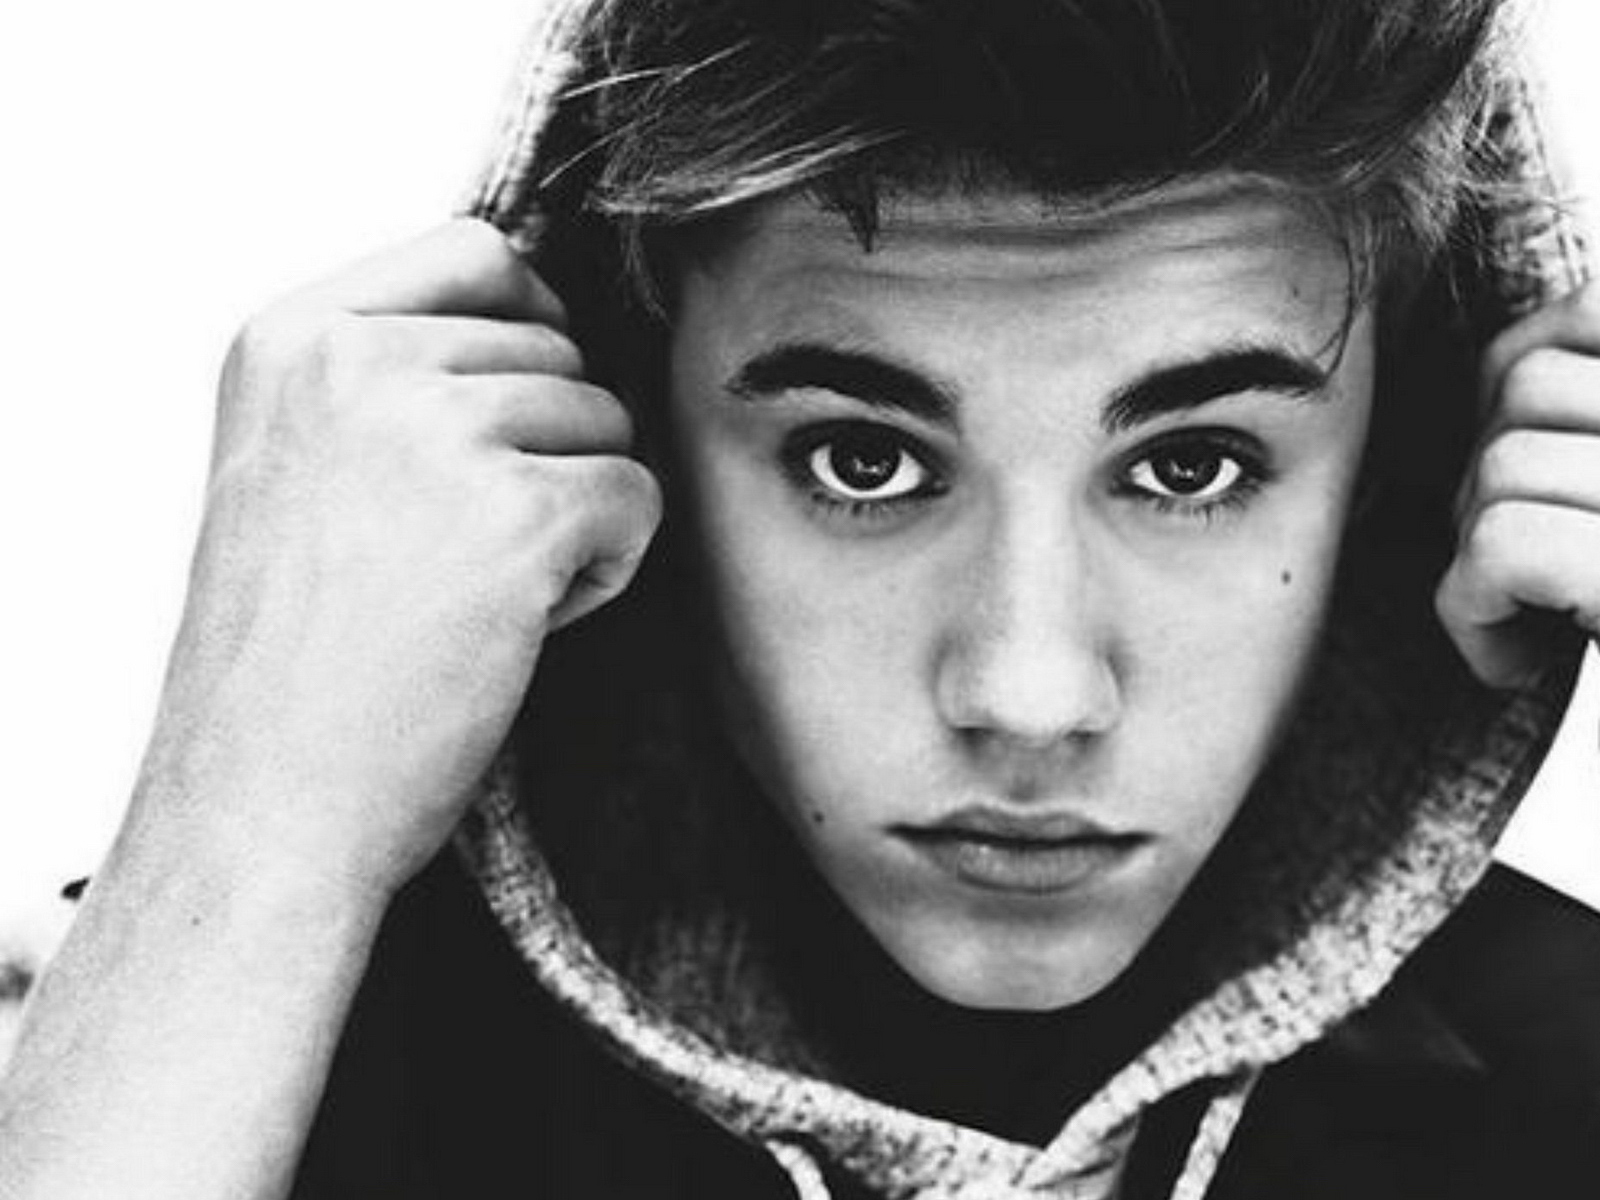 Justin Bieber Denies Fathering Child With Alleged Baby Mom